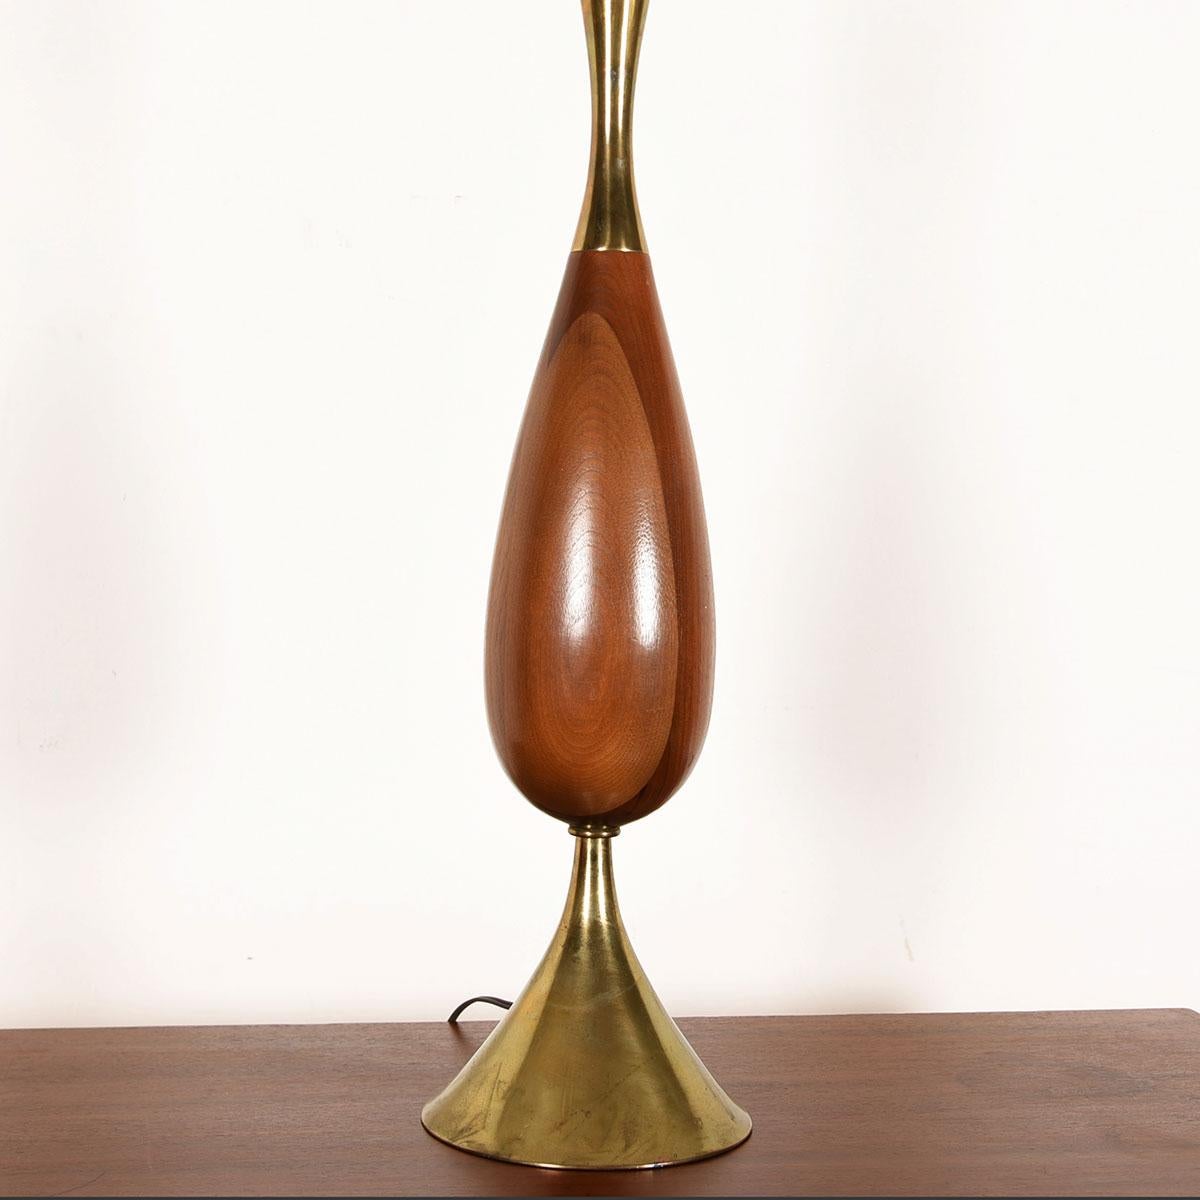 Midcentury Tall Walnut & Brass Table Lamp by Tony Paul for Westwood In Excellent Condition For Sale In Kensington, MD